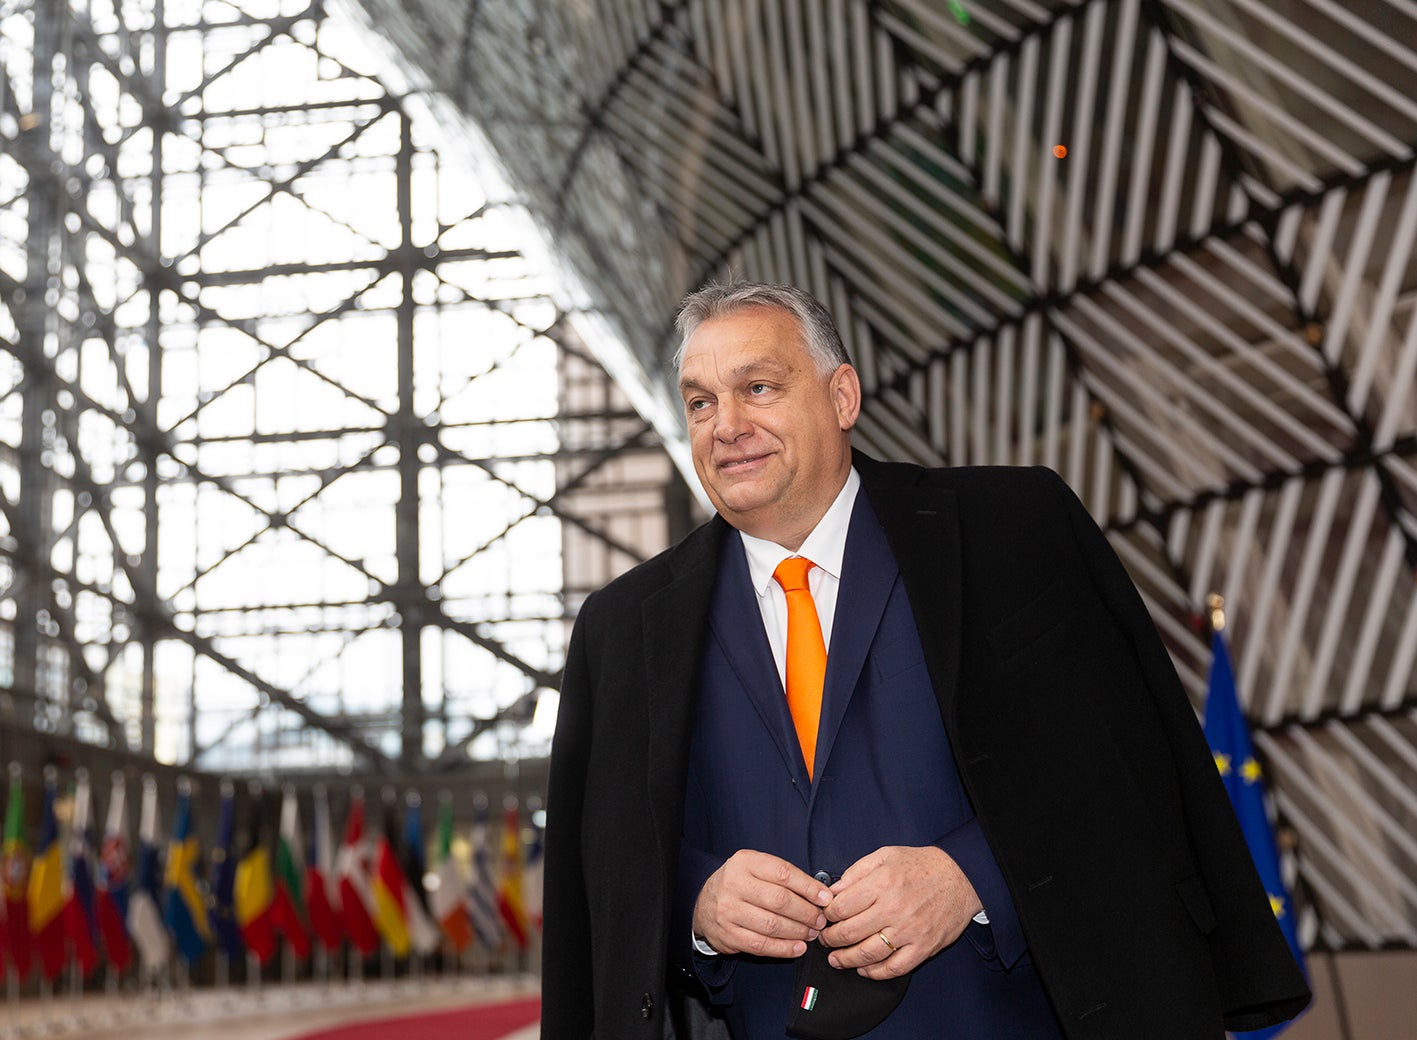 The EU now has to get tough on illiberal Orbán